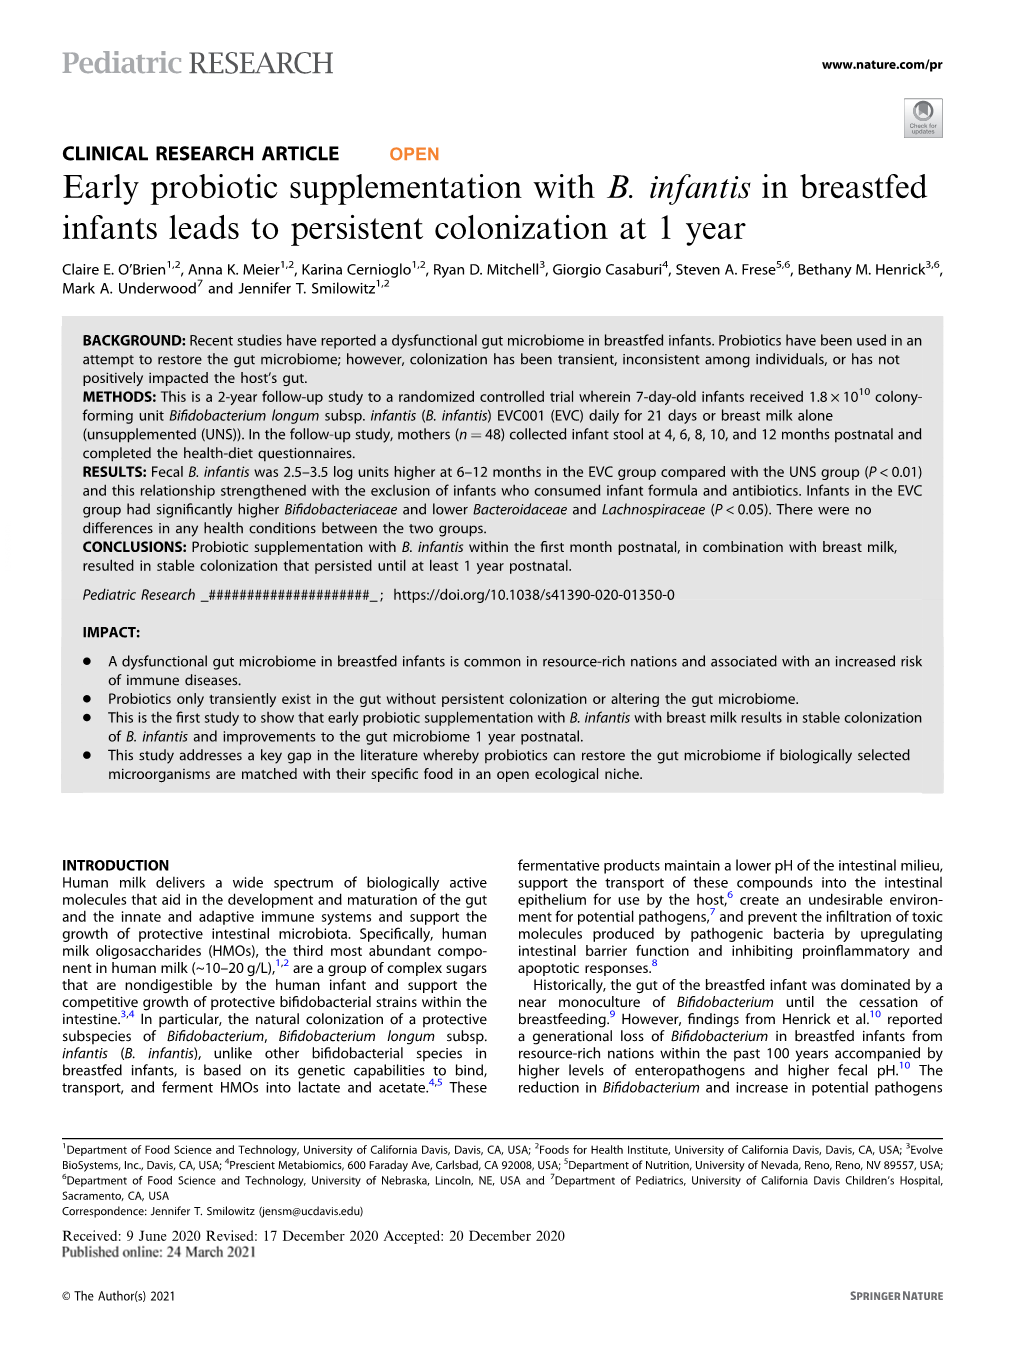 Early Probiotic Supplementation with B. Infantis in Breastfed Infants Leads to Persistent Colonization at 1 Year